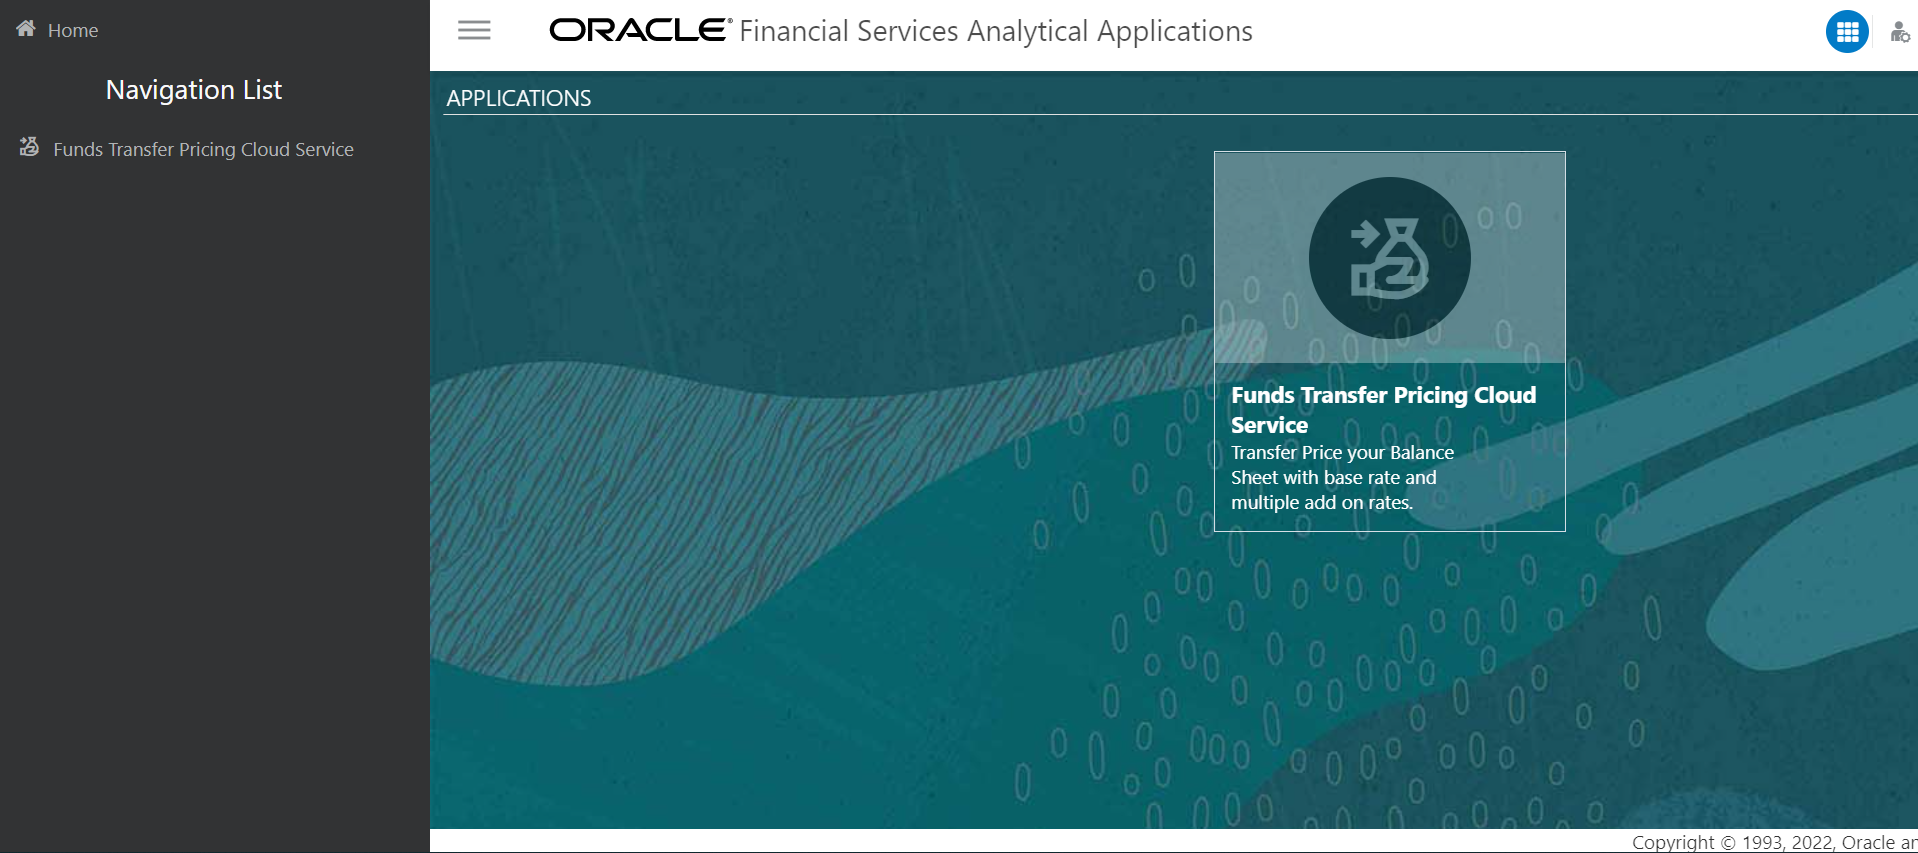 This image displays the Funds Transfer Pricing Cloud Service Home Page